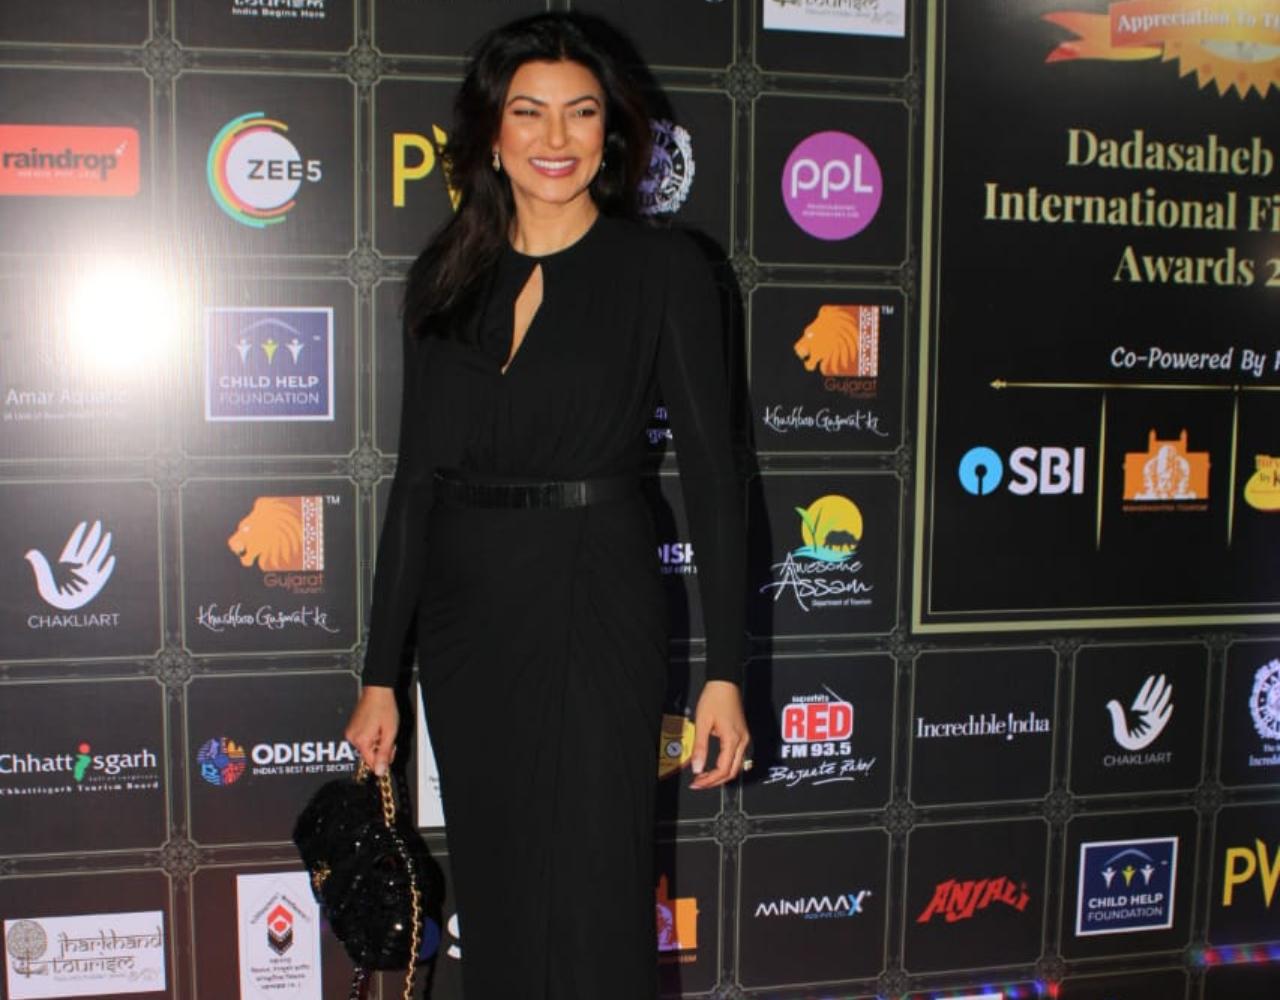 Sushmita Sen looked royal in her black shirt dress and pants as she posed for the paparazzi. Sushmita recently made a smashing comeback with web series Aarya.